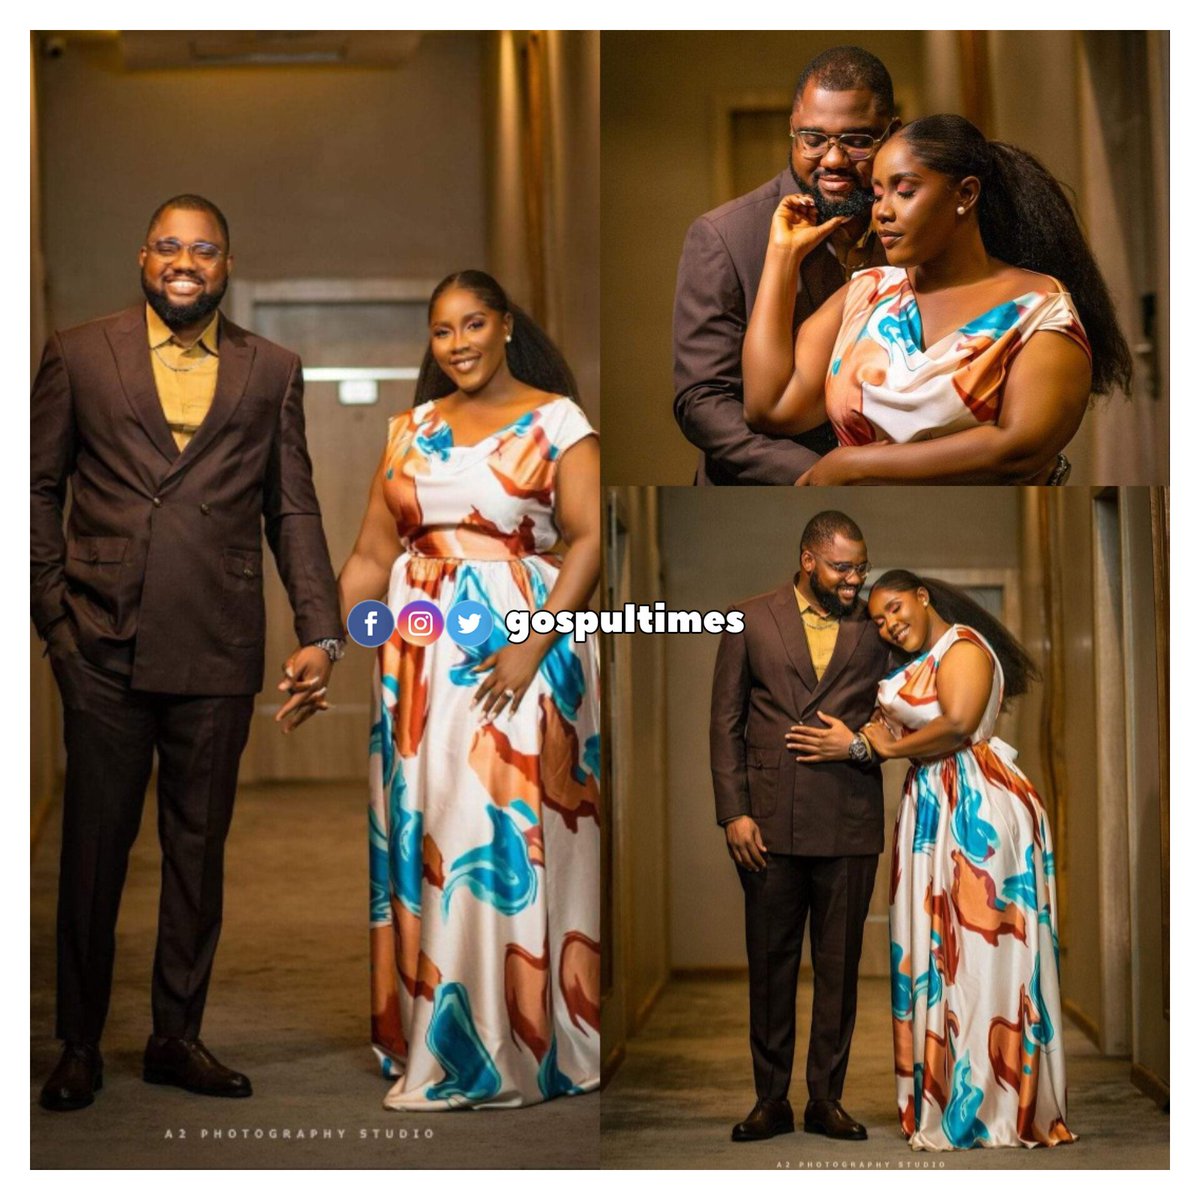 Pastor Femi Babs and his wife to be pre-wedding pictures ❤️🤩😍

Congratulations to them!

Follow @gospultimes 
.
.
#gospelupdates #gospelnews #gospeltrends #gospultimes